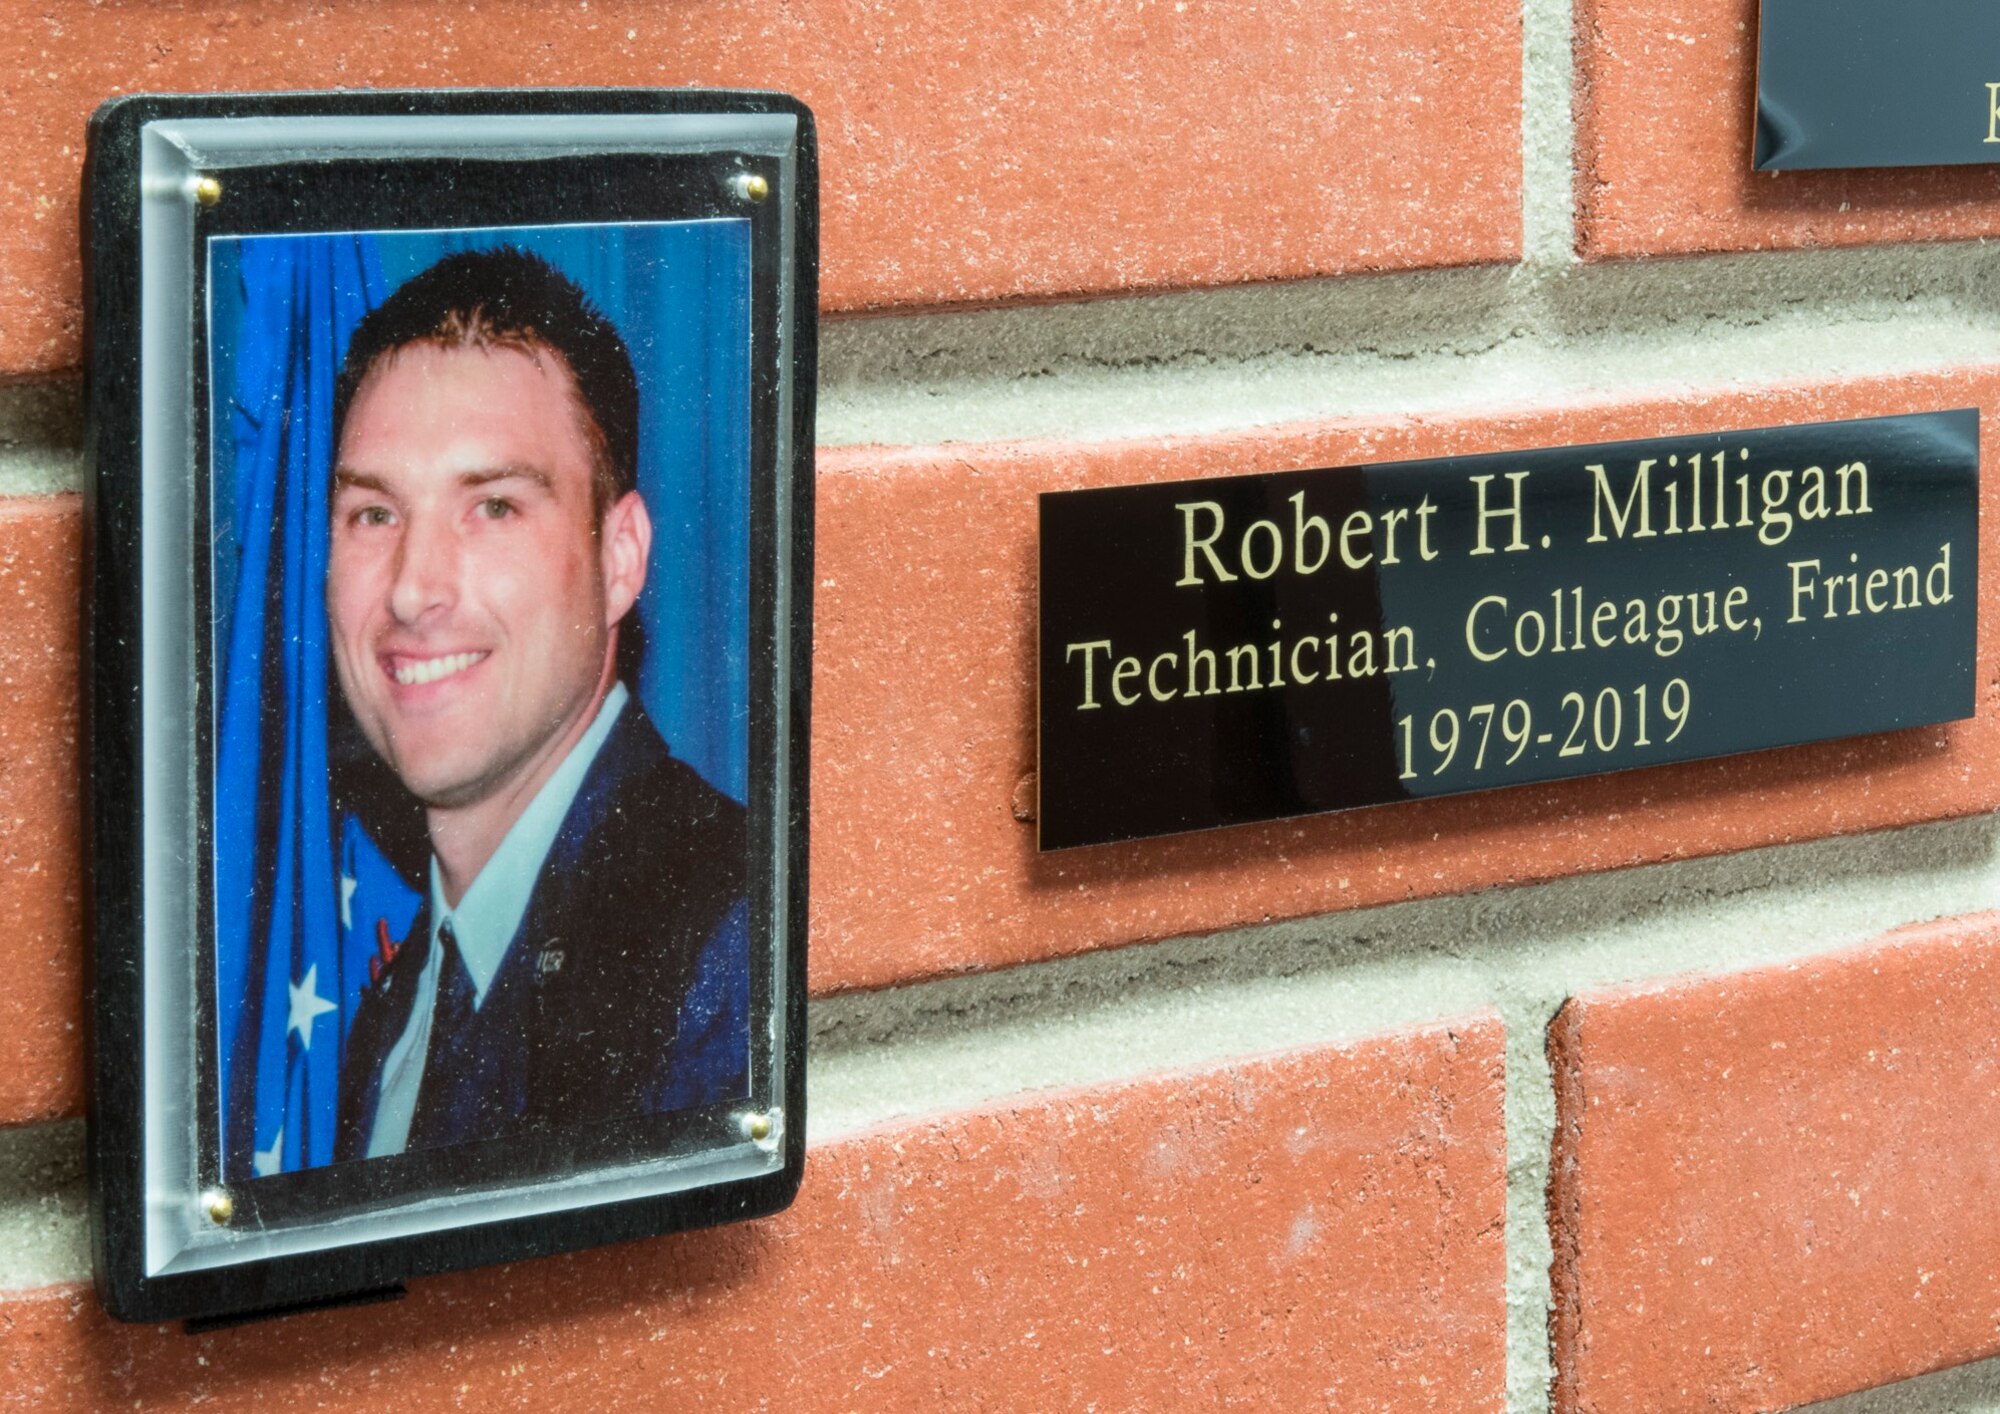 On Veterans Day, 2020, former Office of Special Investigations Special Agent Robert H. Milligan was enshrined on the Interagency Training Center (ITC) “Wall of Honor” at Fort Washington, Md. (Courtesy photo)